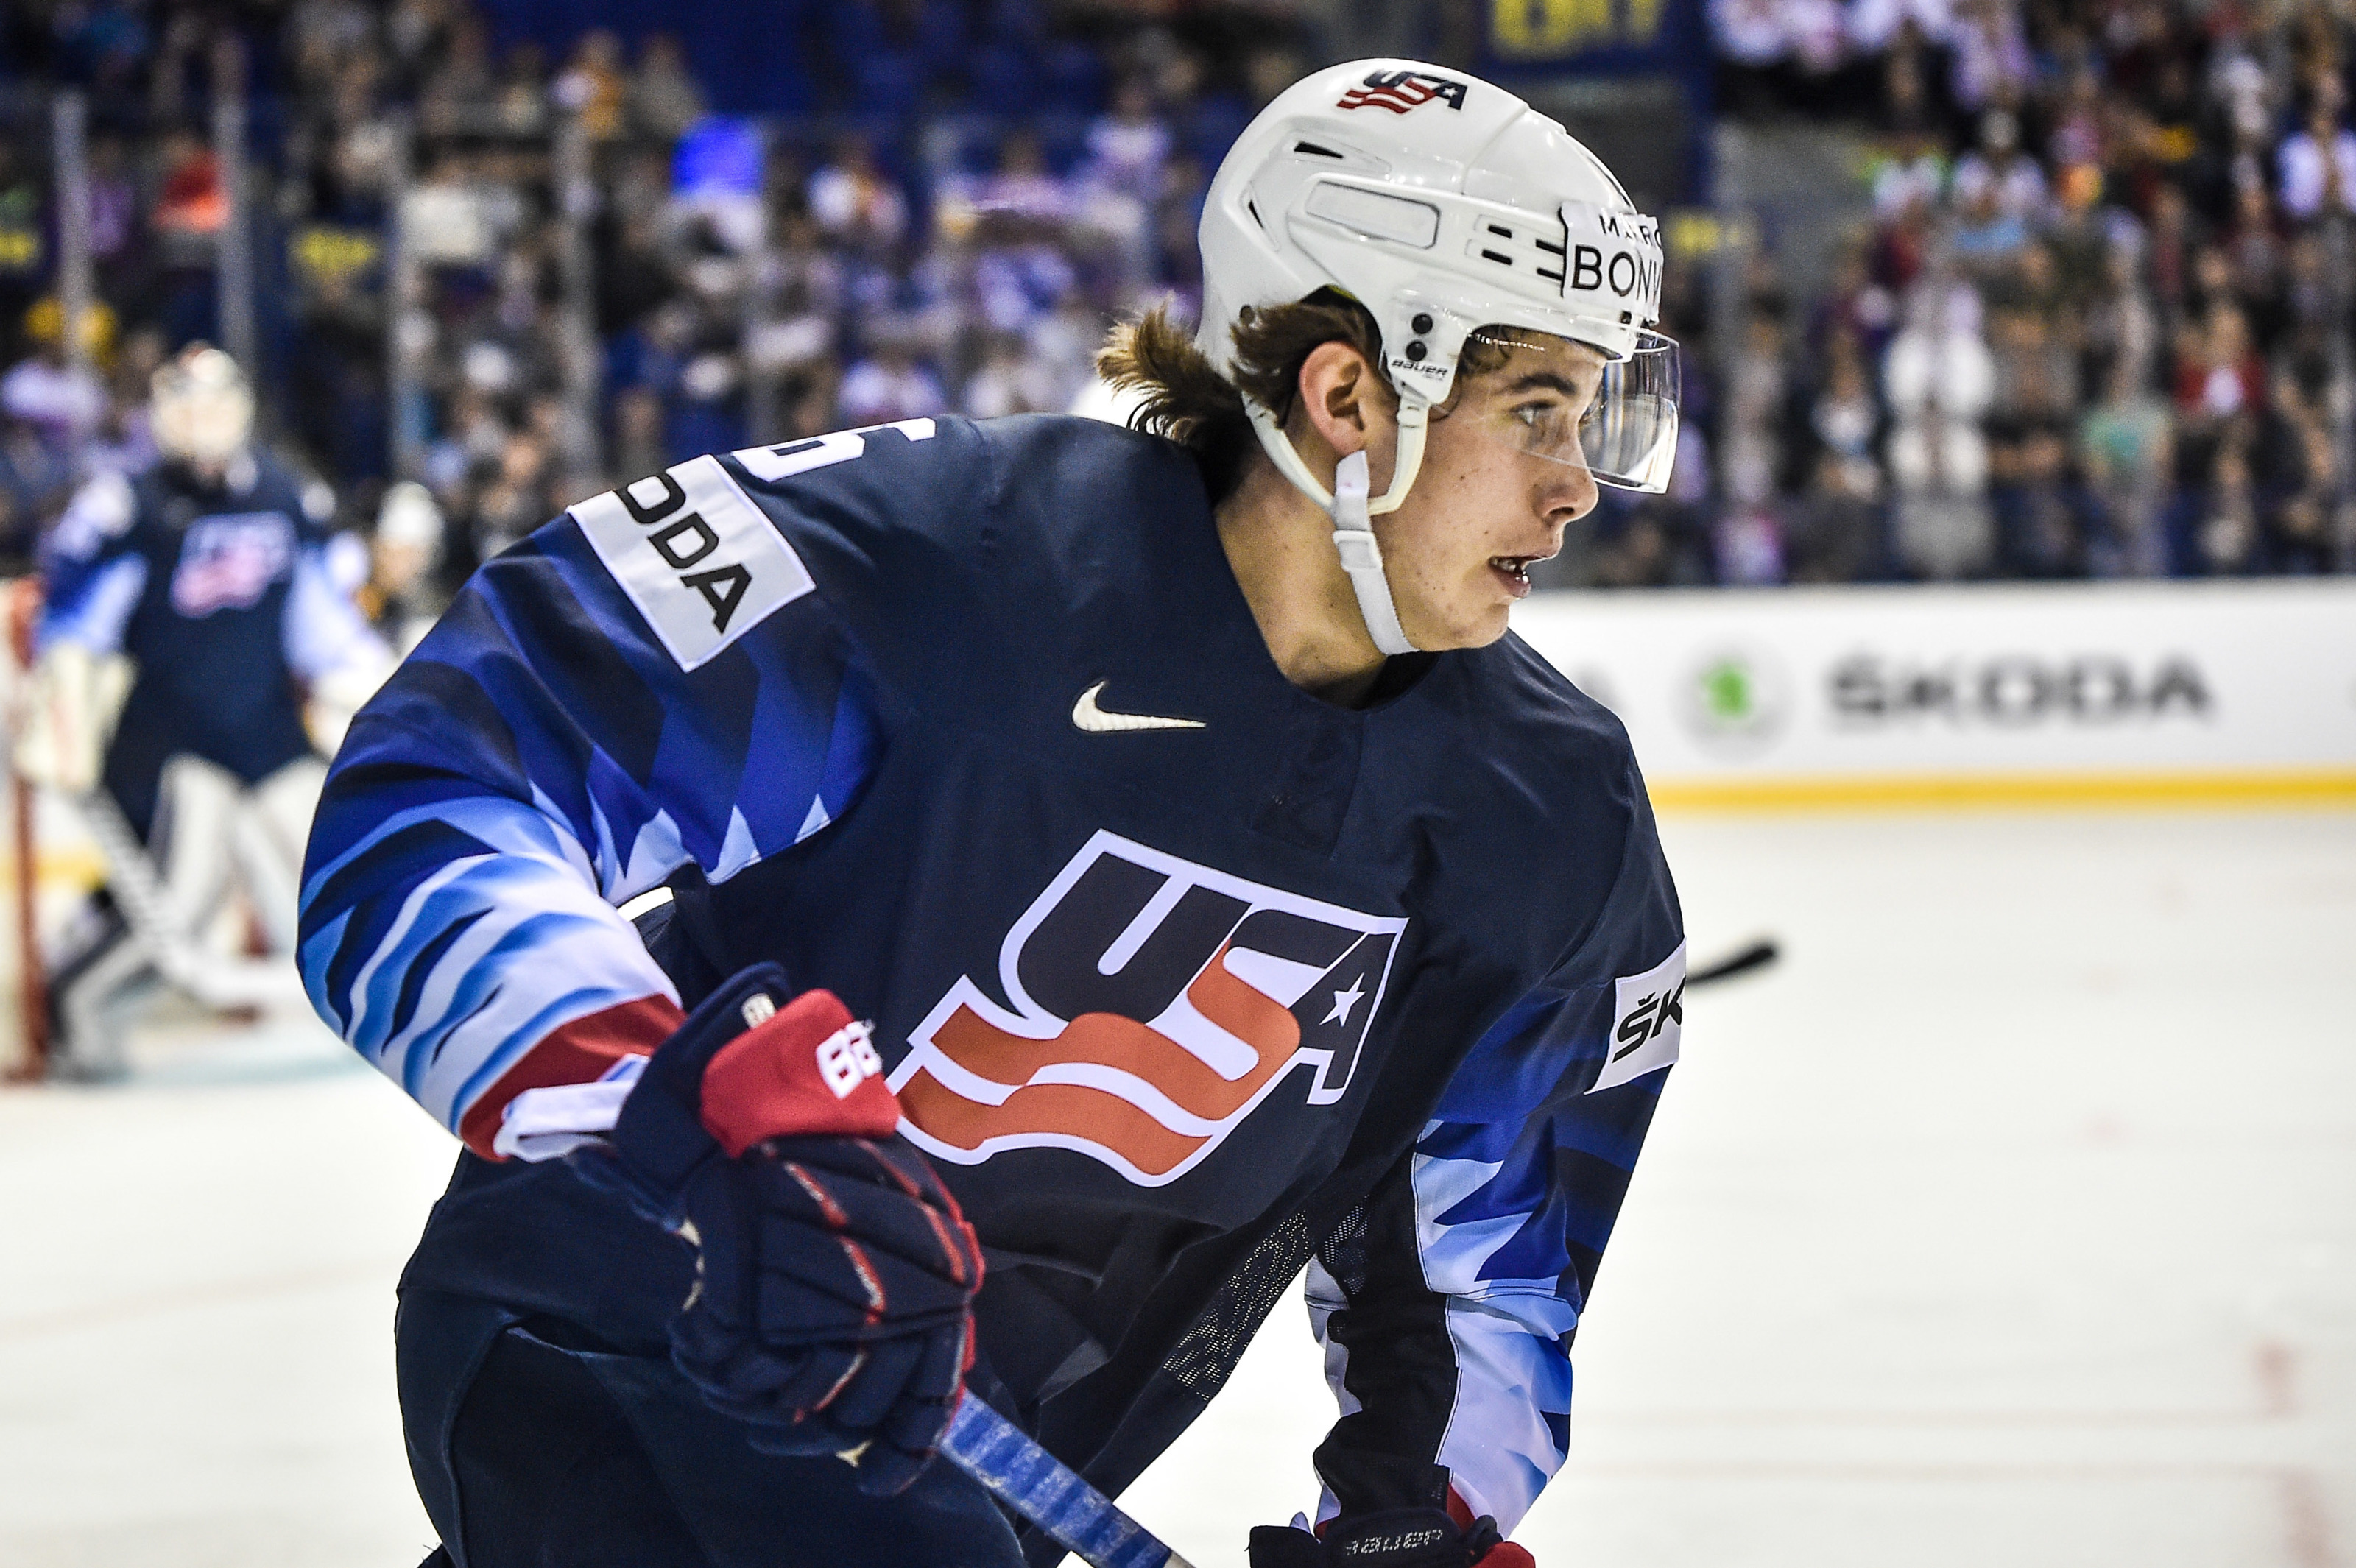 New Jersey Devils: Jack Hughes Will Be Next Great USA Player